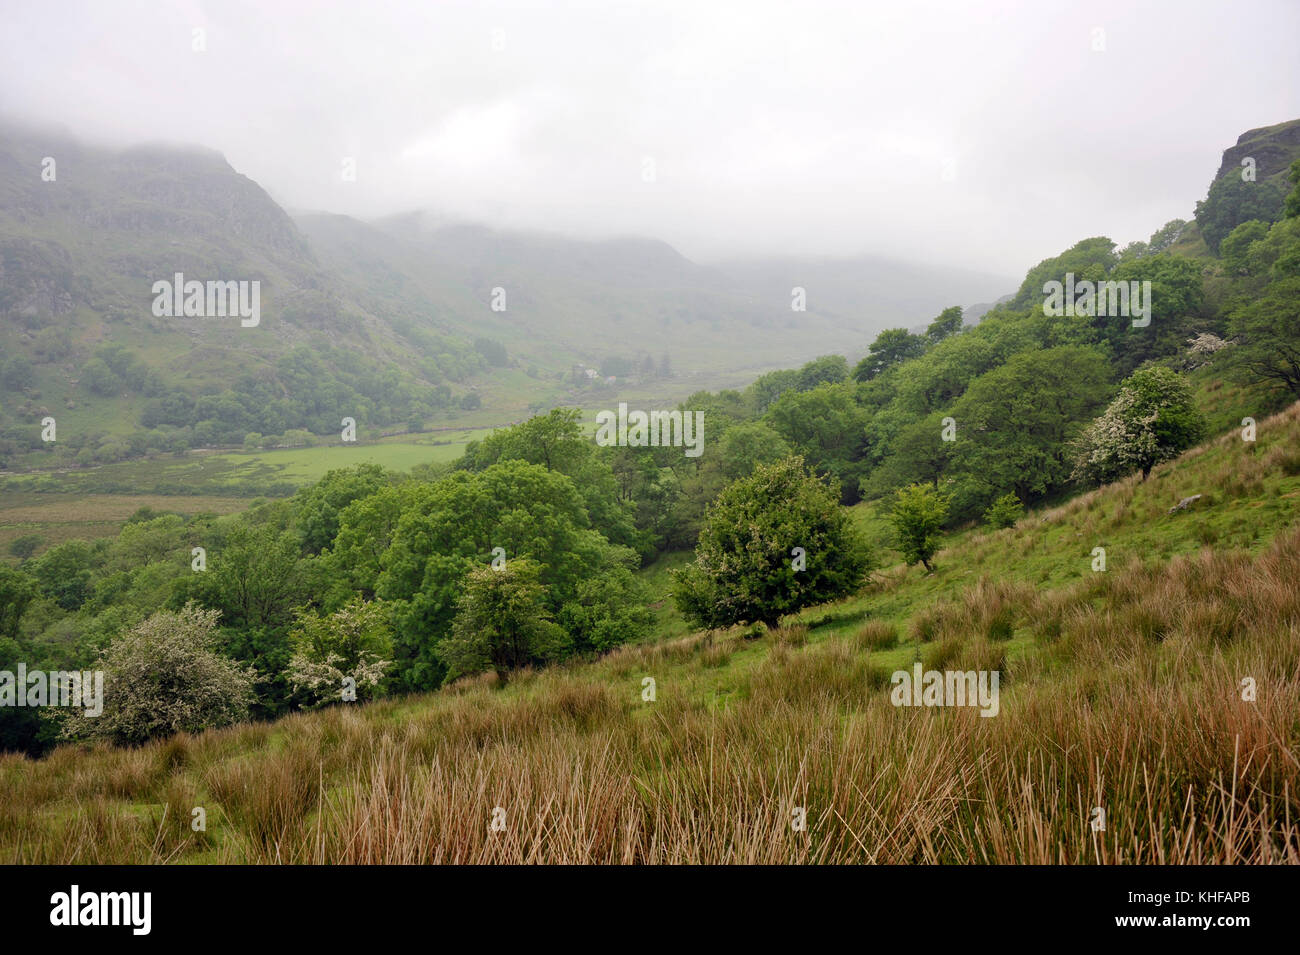 Misty morning looking south along Nant Gwynant Valley in the Snowdonia National Park, North Wales, UK. Stock Photo